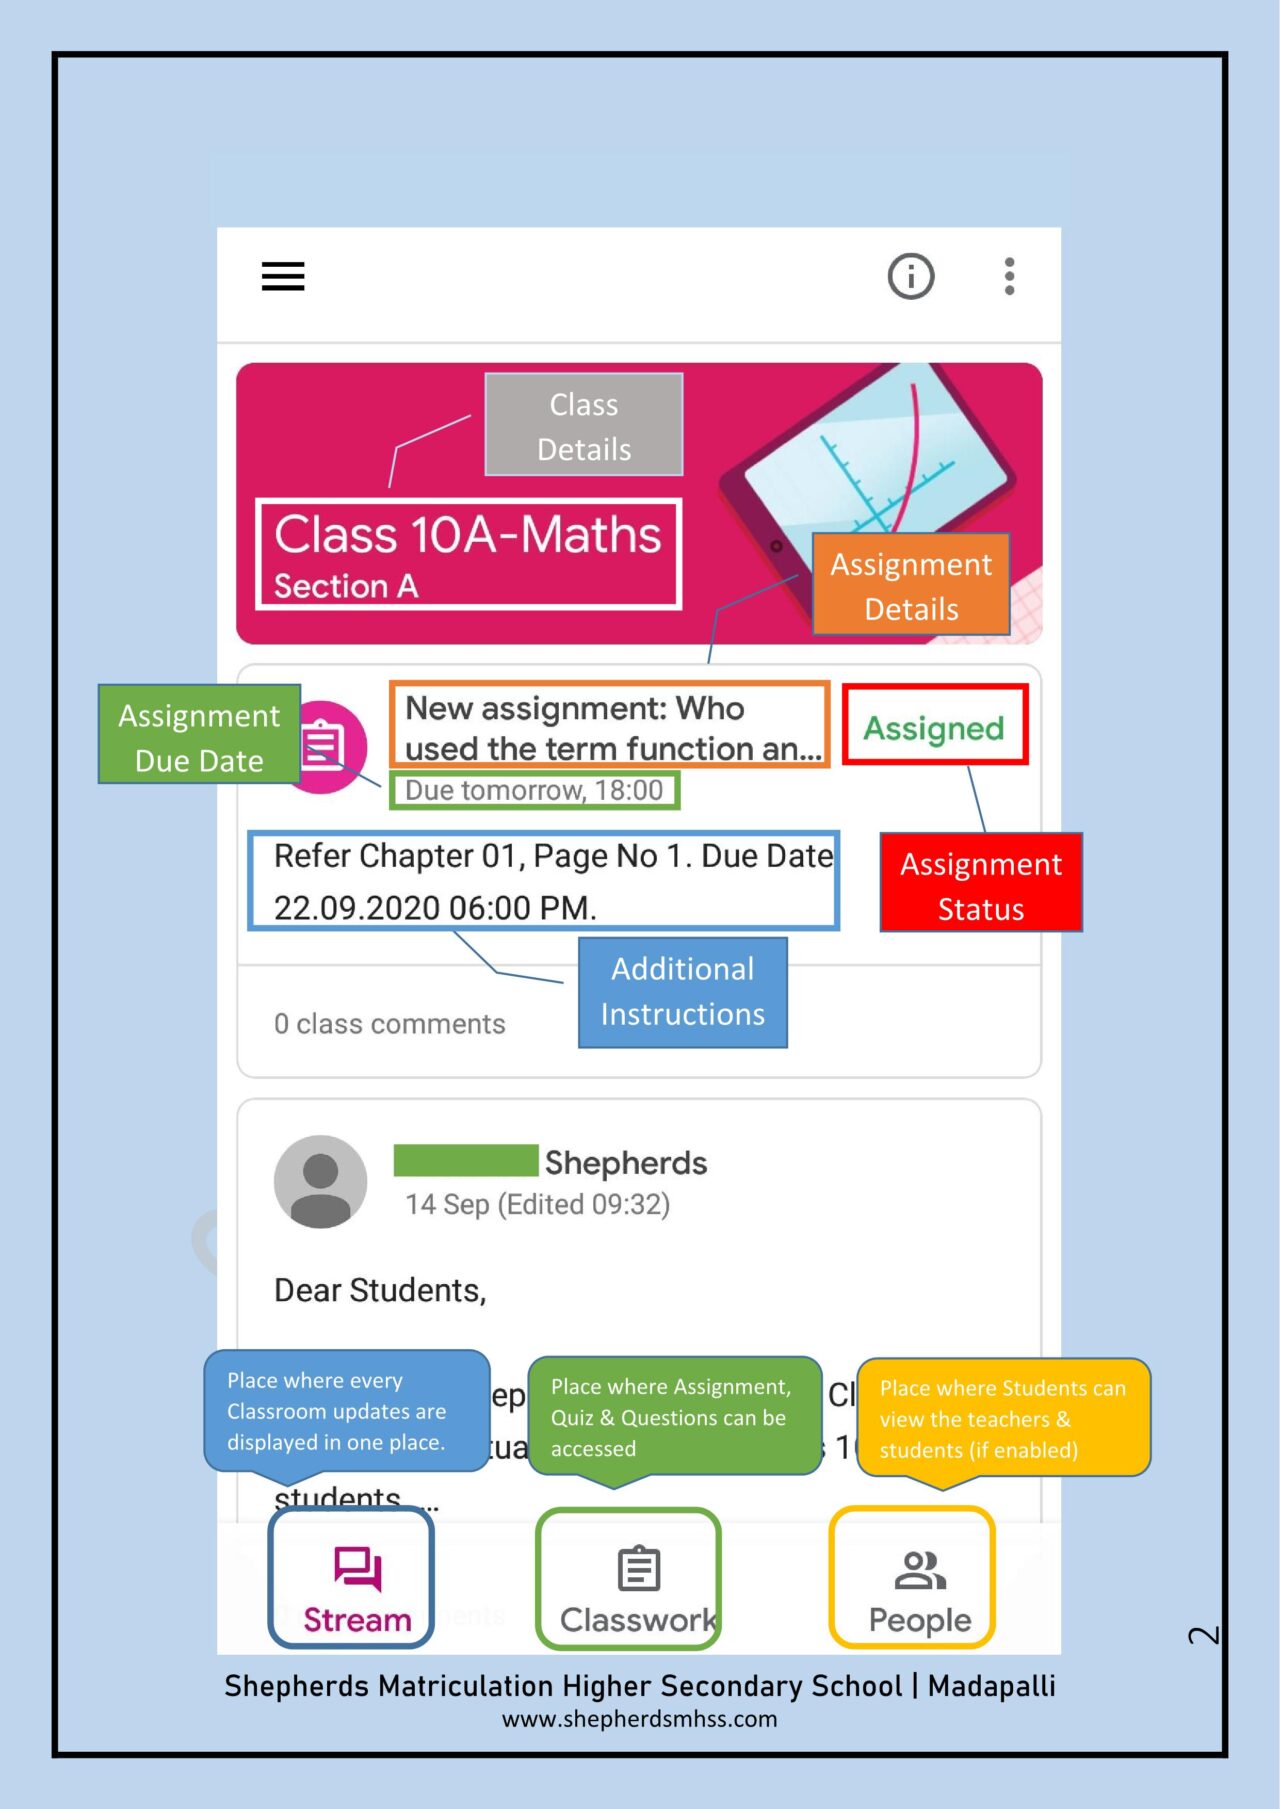 unsubmitted assignment on google classroom